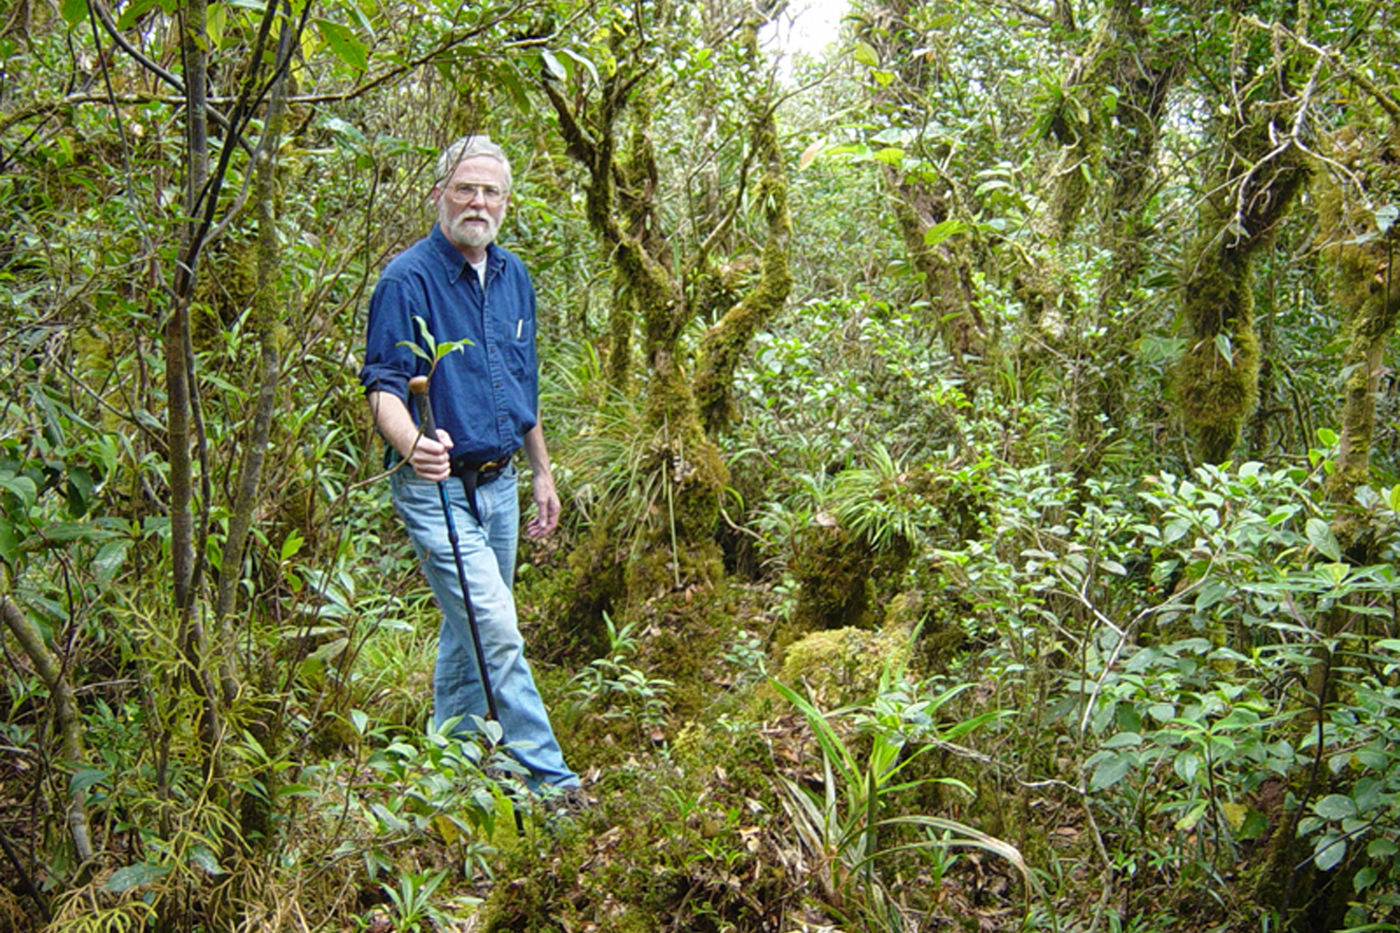 A man stands in the middle of a tropical forest, with bright green plants and mosses surrounding him. He holds a walking stick and poses for the camera.